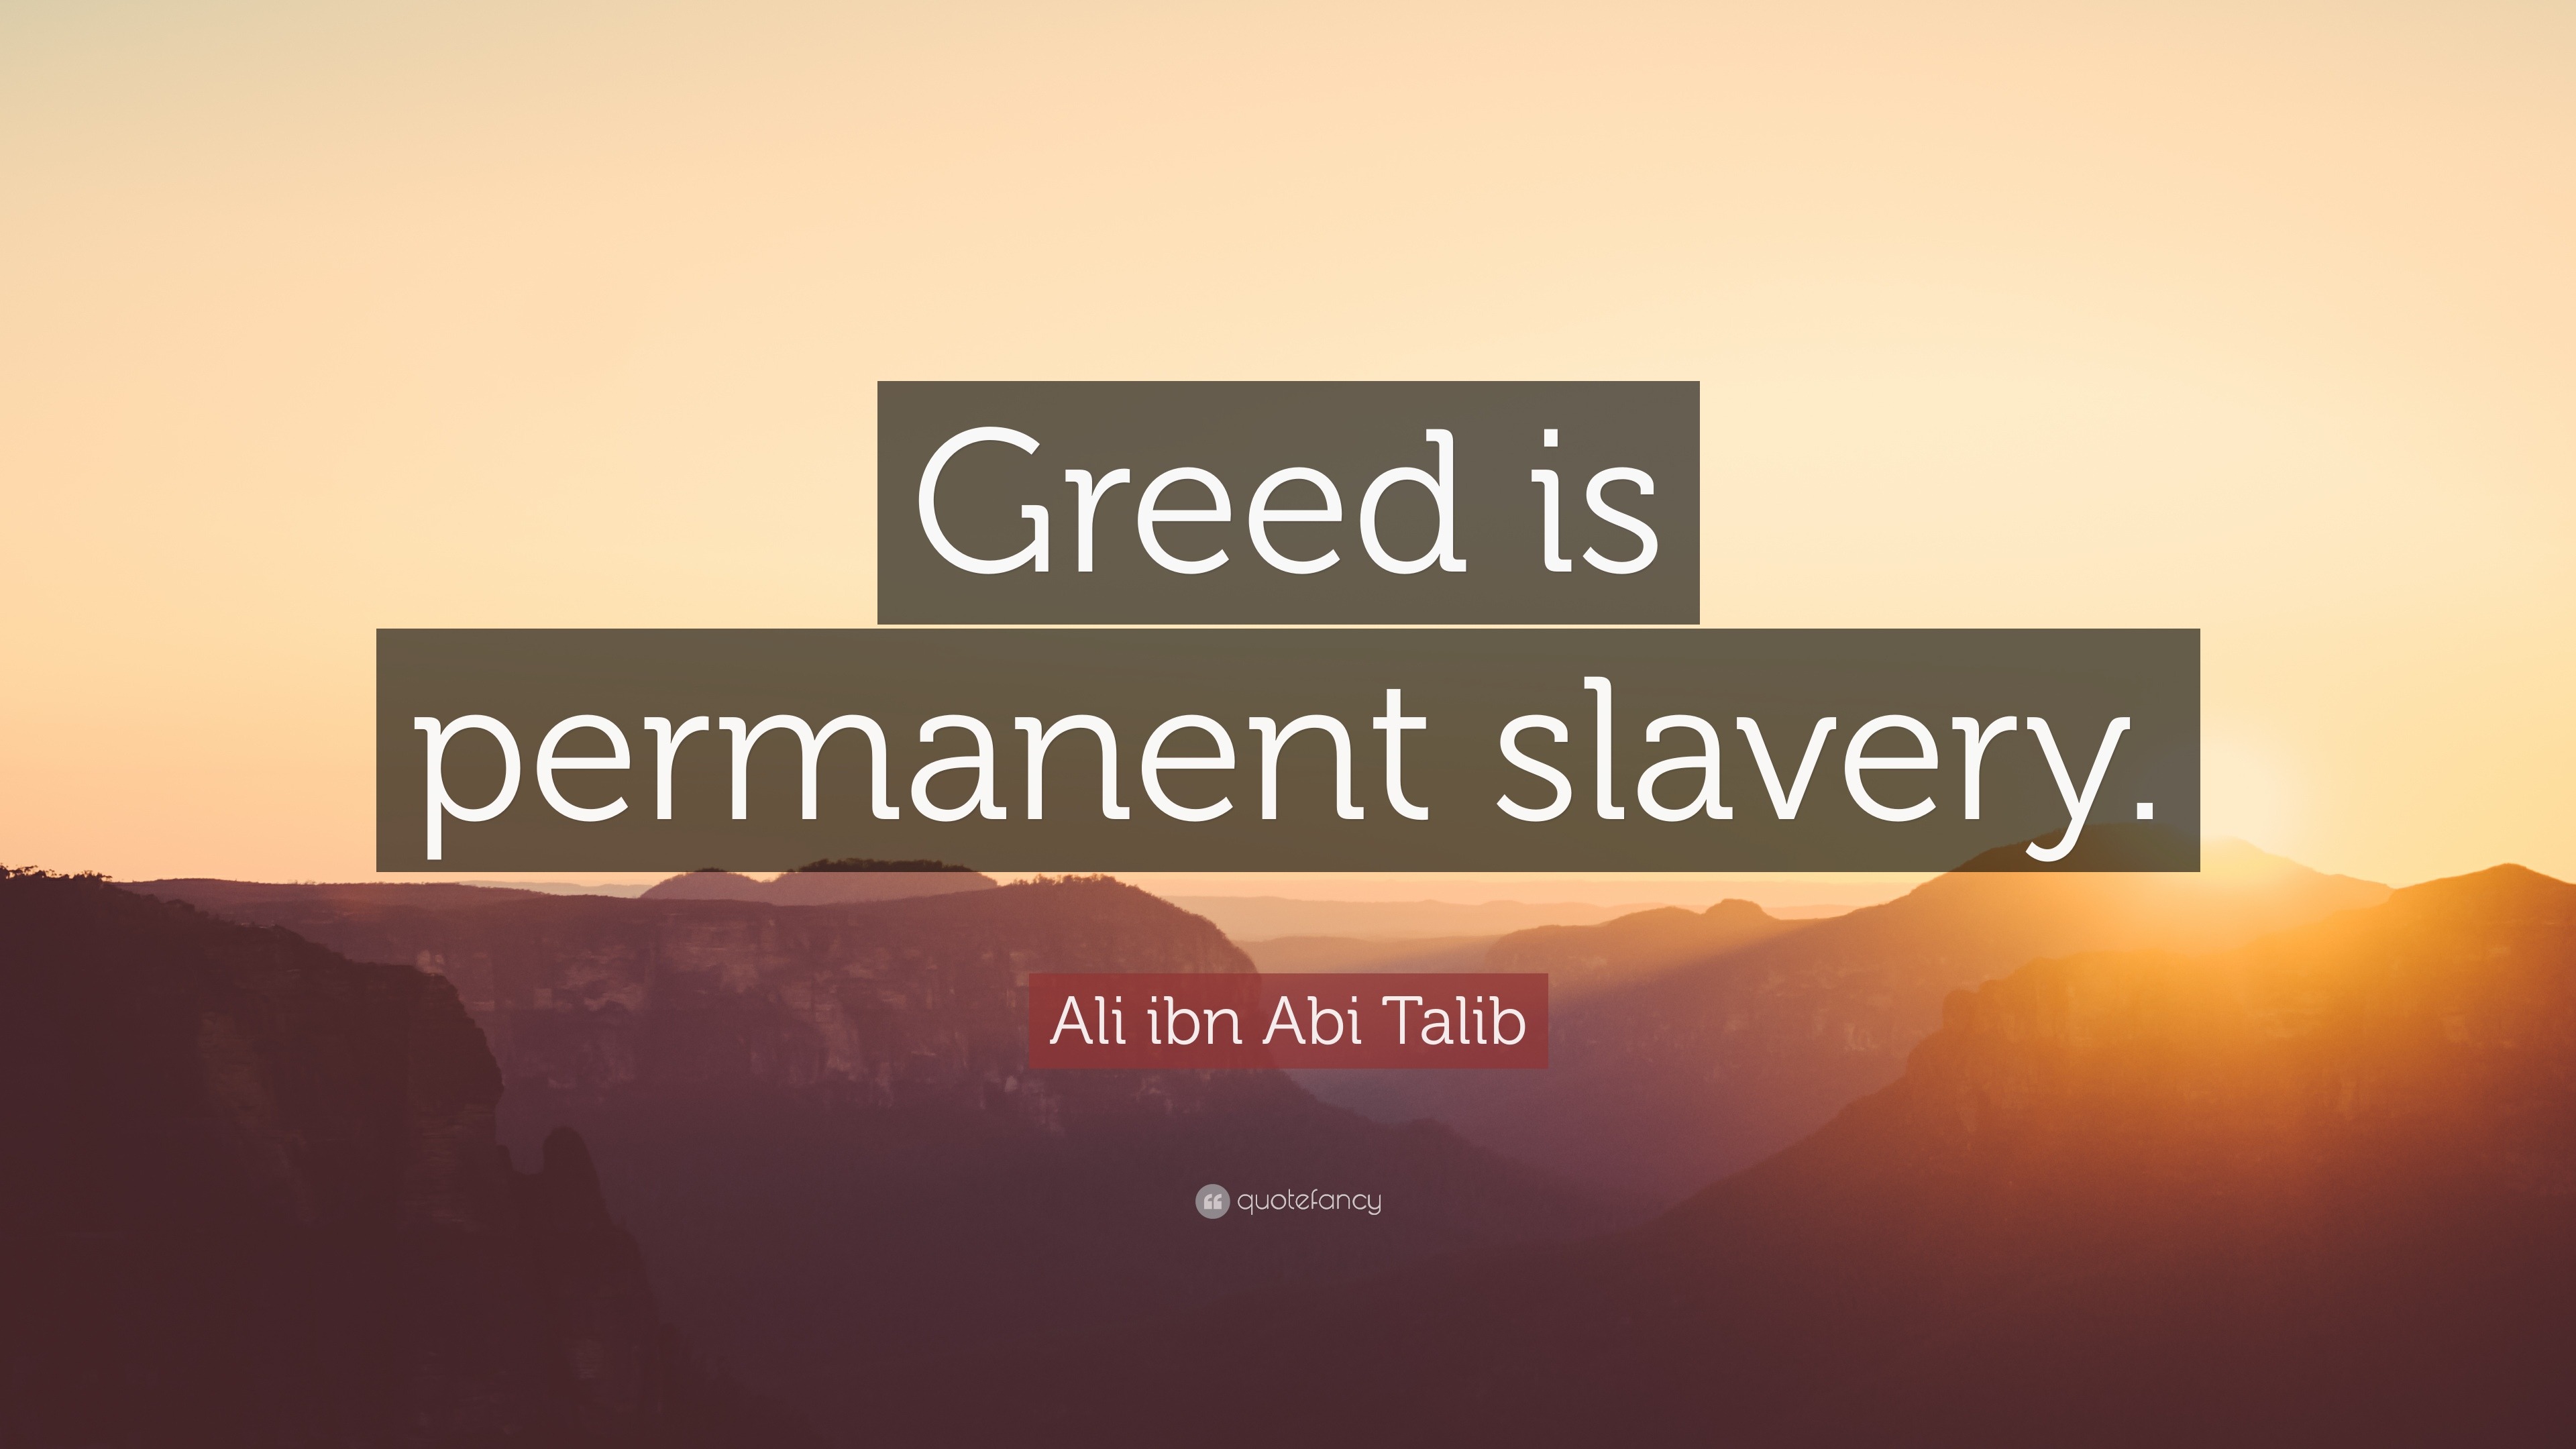 Top 40 Quotes About Greed 22 Update Quotefancy